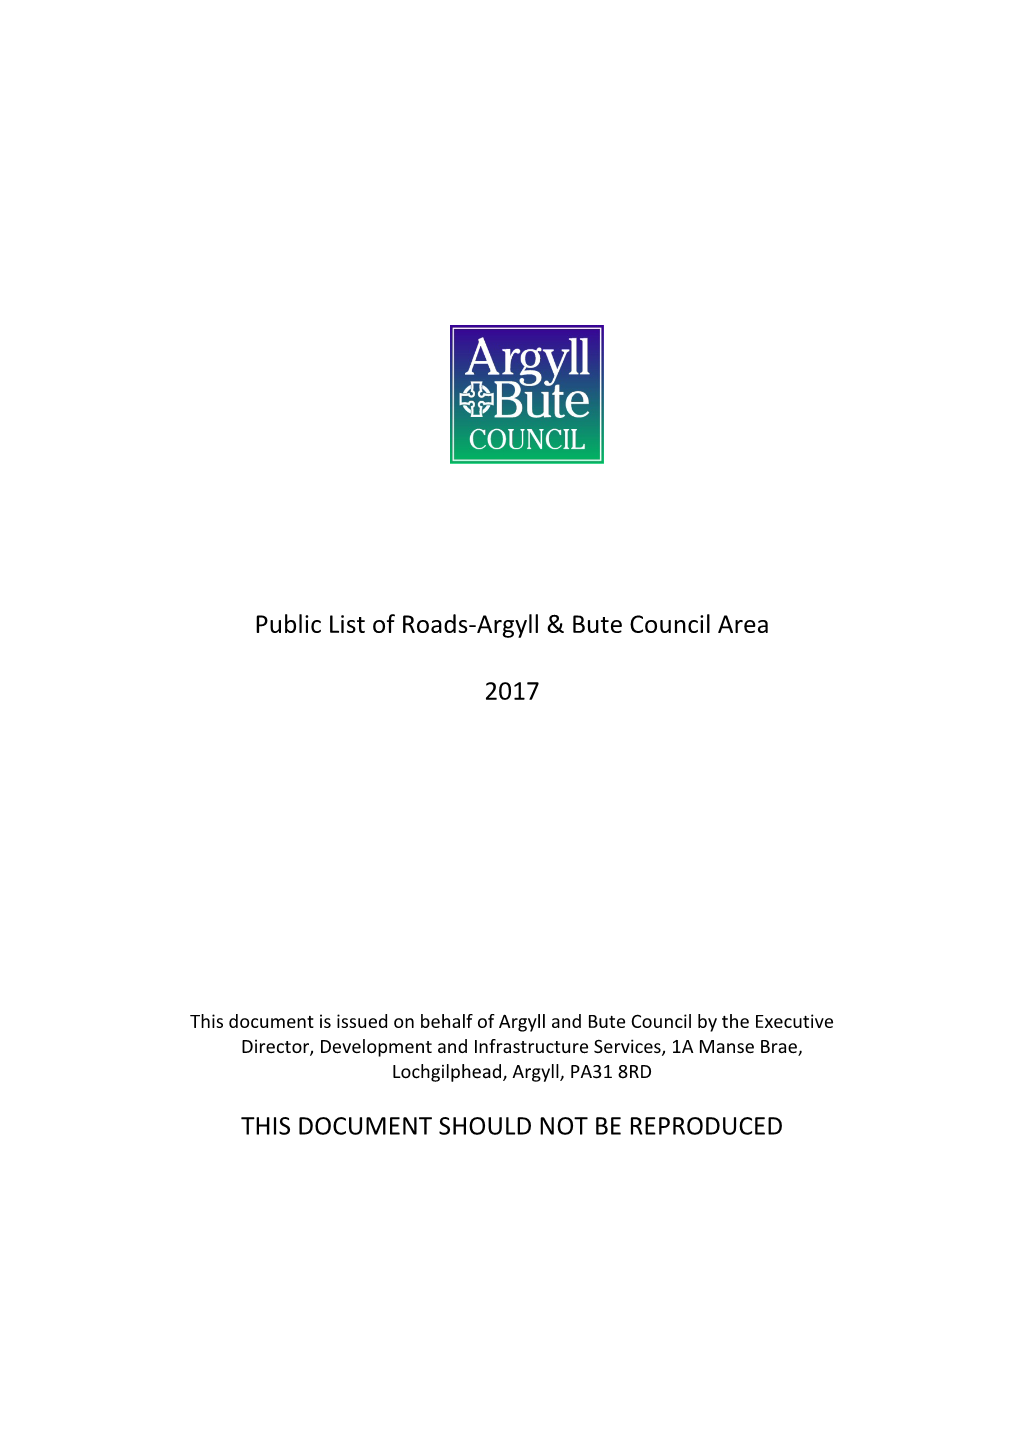 Public List of Roads-Argyll & Bute Council Area 2017 THIS DOCUMENT SHOULD NOT BE REPRODUCED